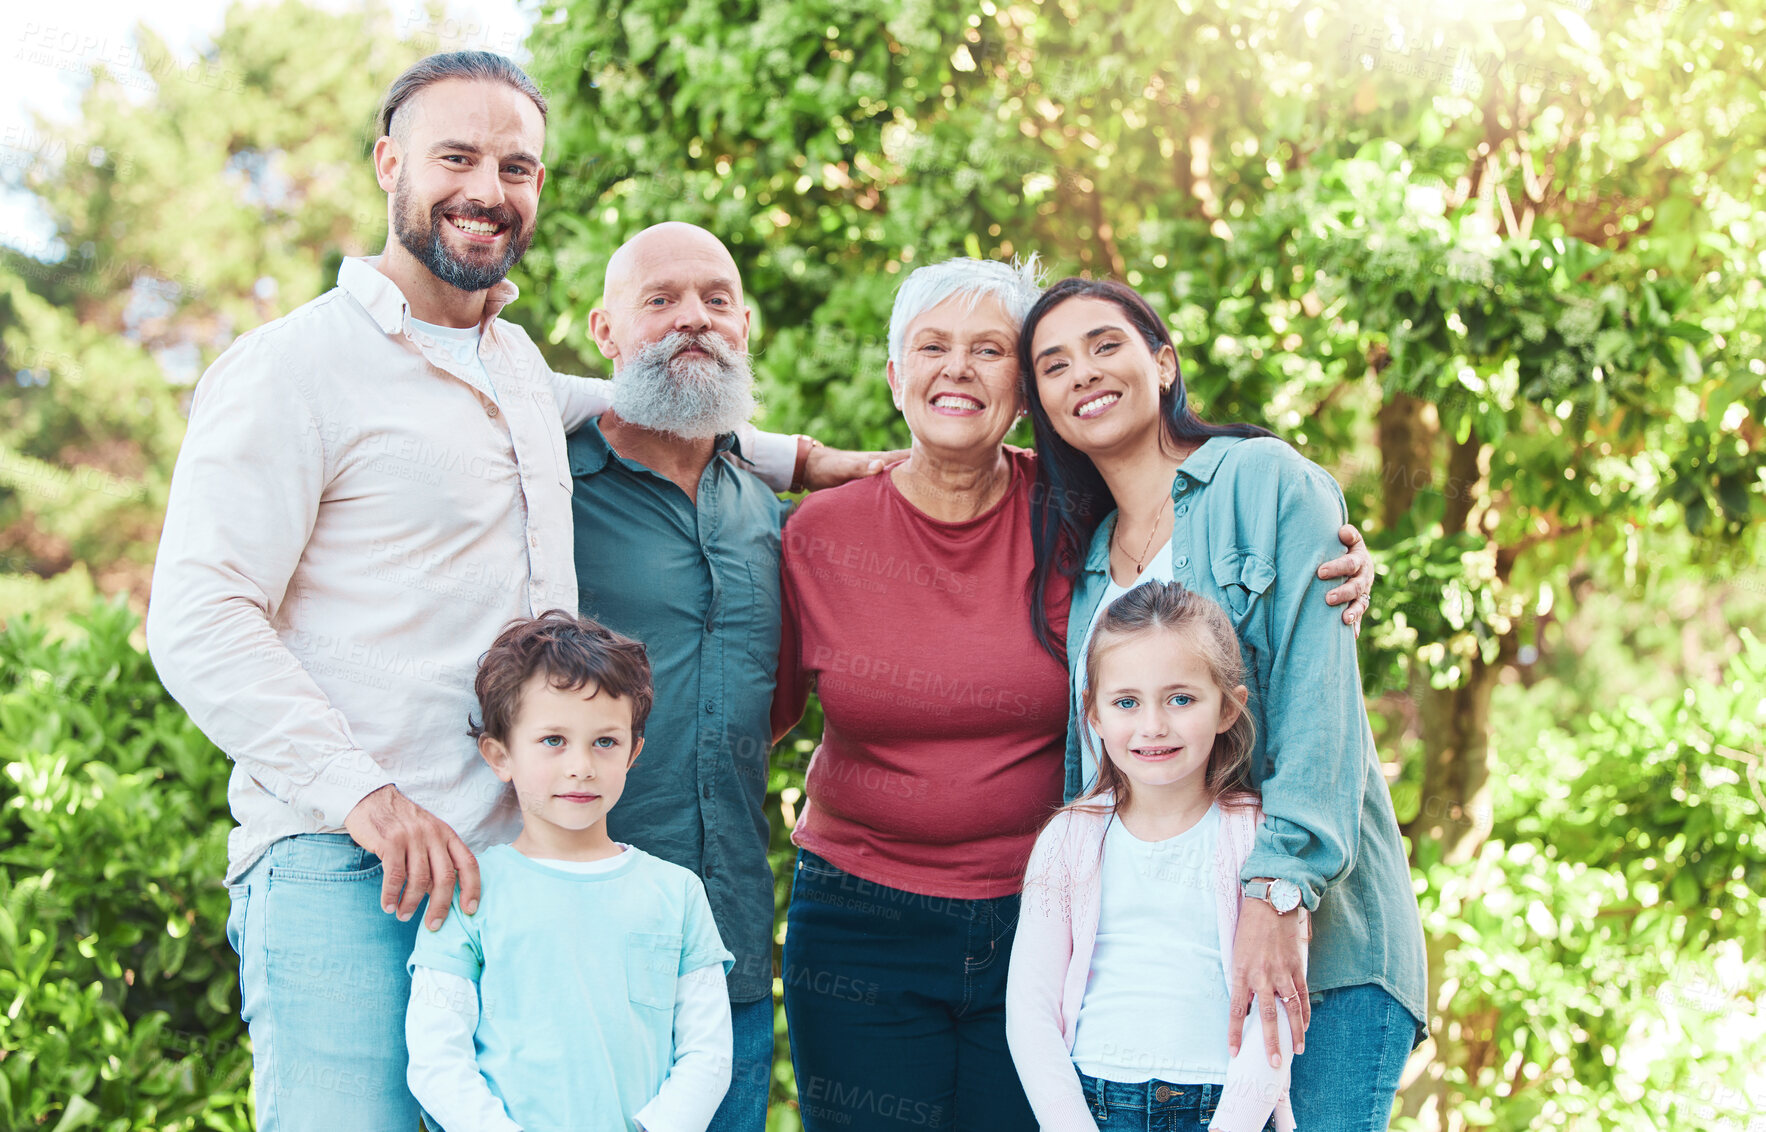 Buy stock photo Family is outdoor, smile in portrait with generations, happiness with grandparents, parents and kids in garden. Happy people together, summer holiday and bonding with love, care and support in nature